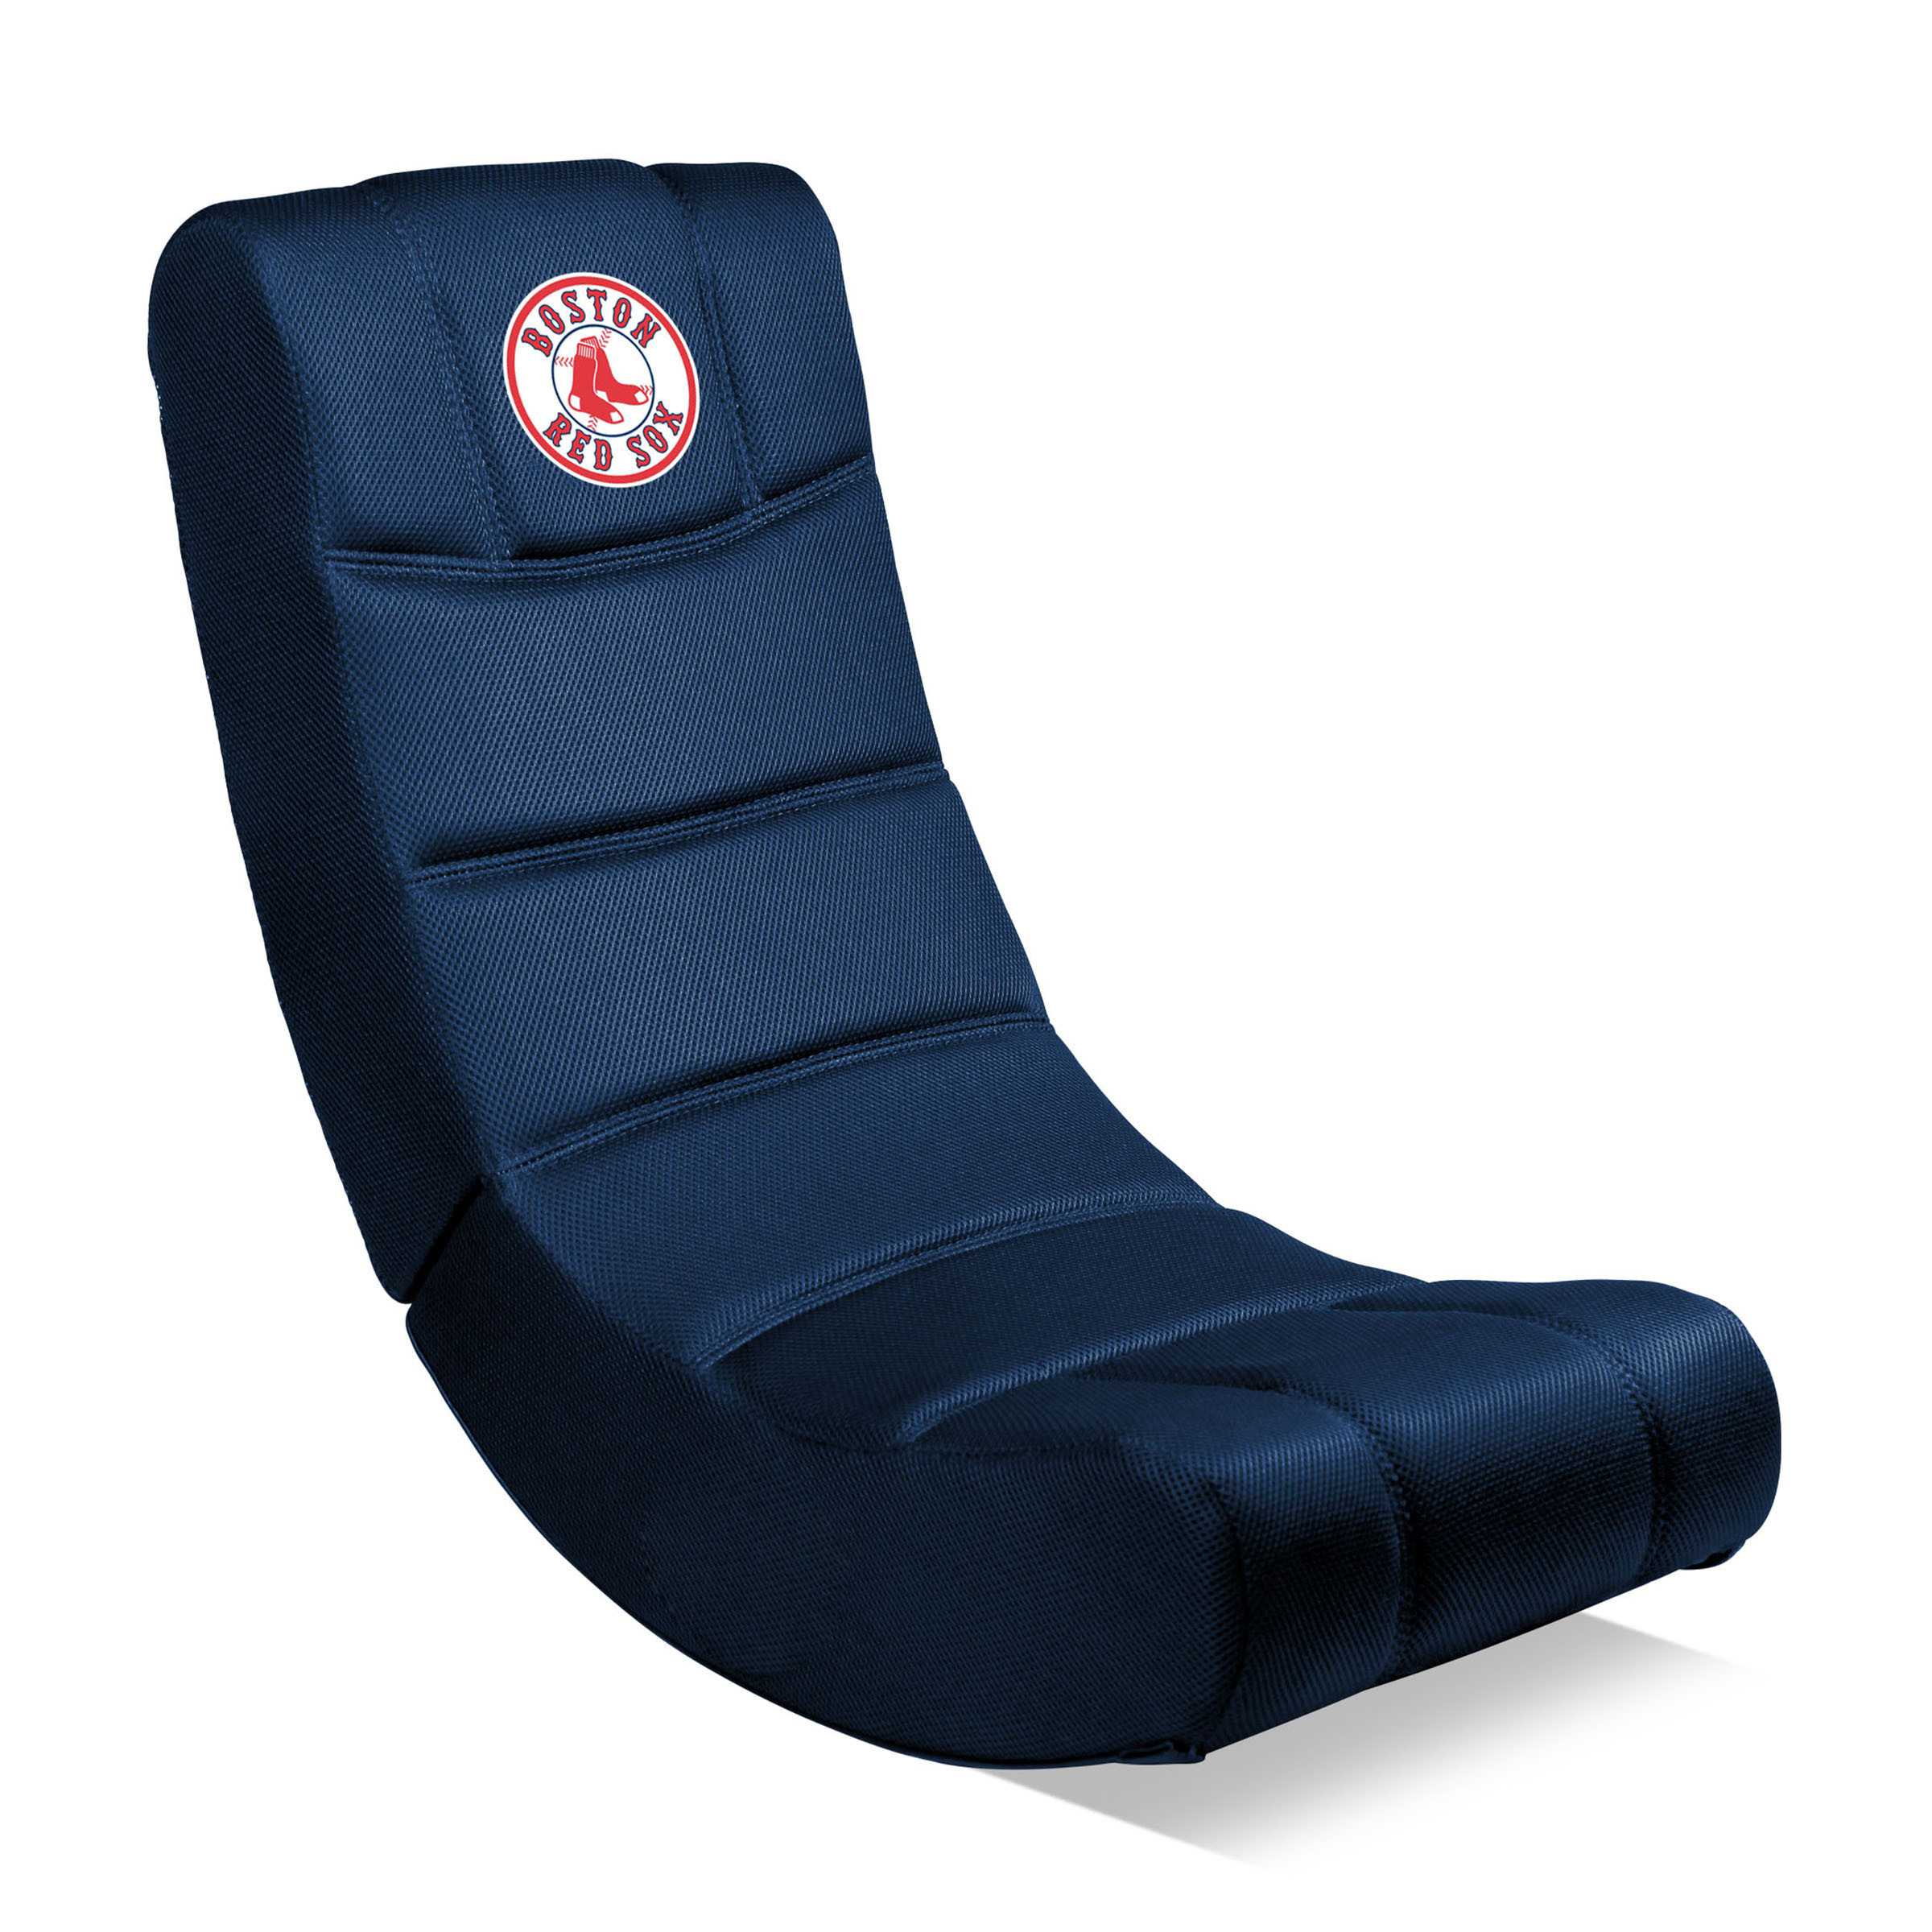 BOSTON RED SOX VIDEO CHAIR